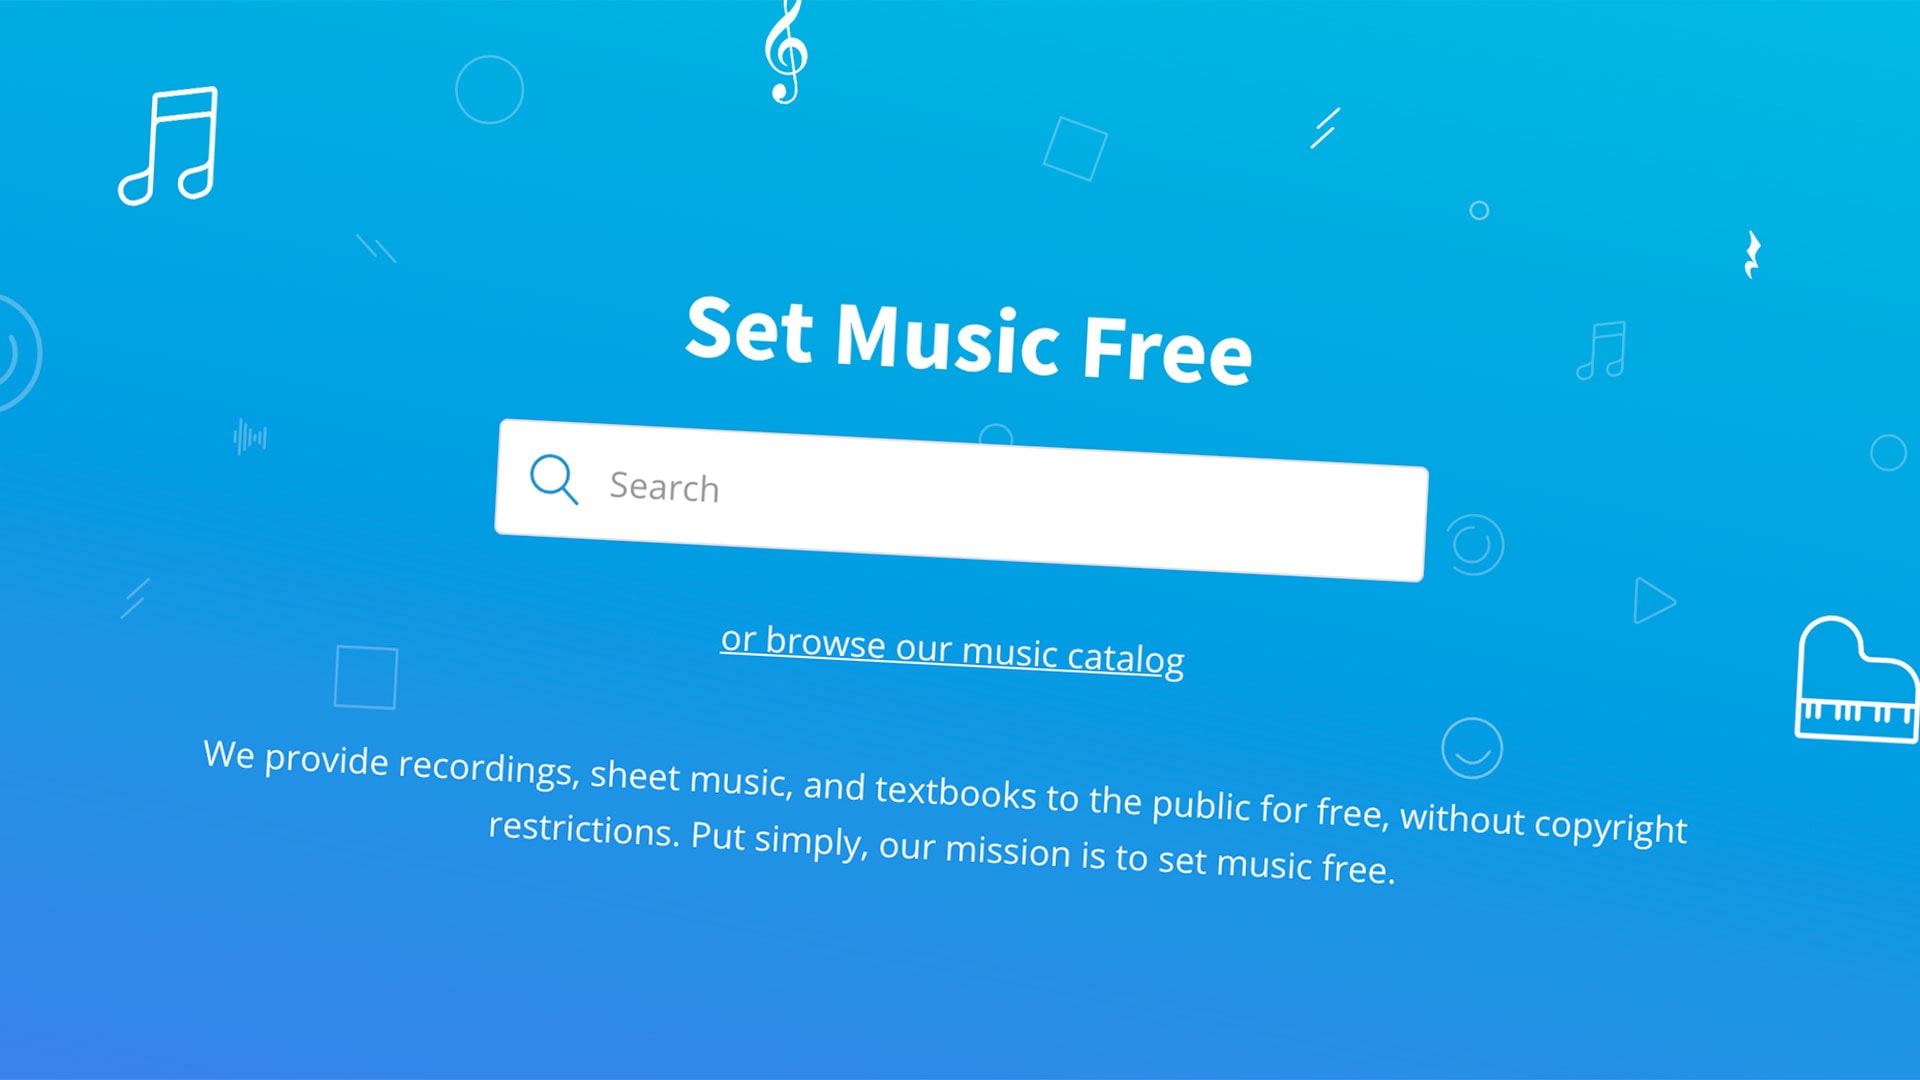 7 Websites to Find Free Creative Commons Music and Sounds - Designmodo